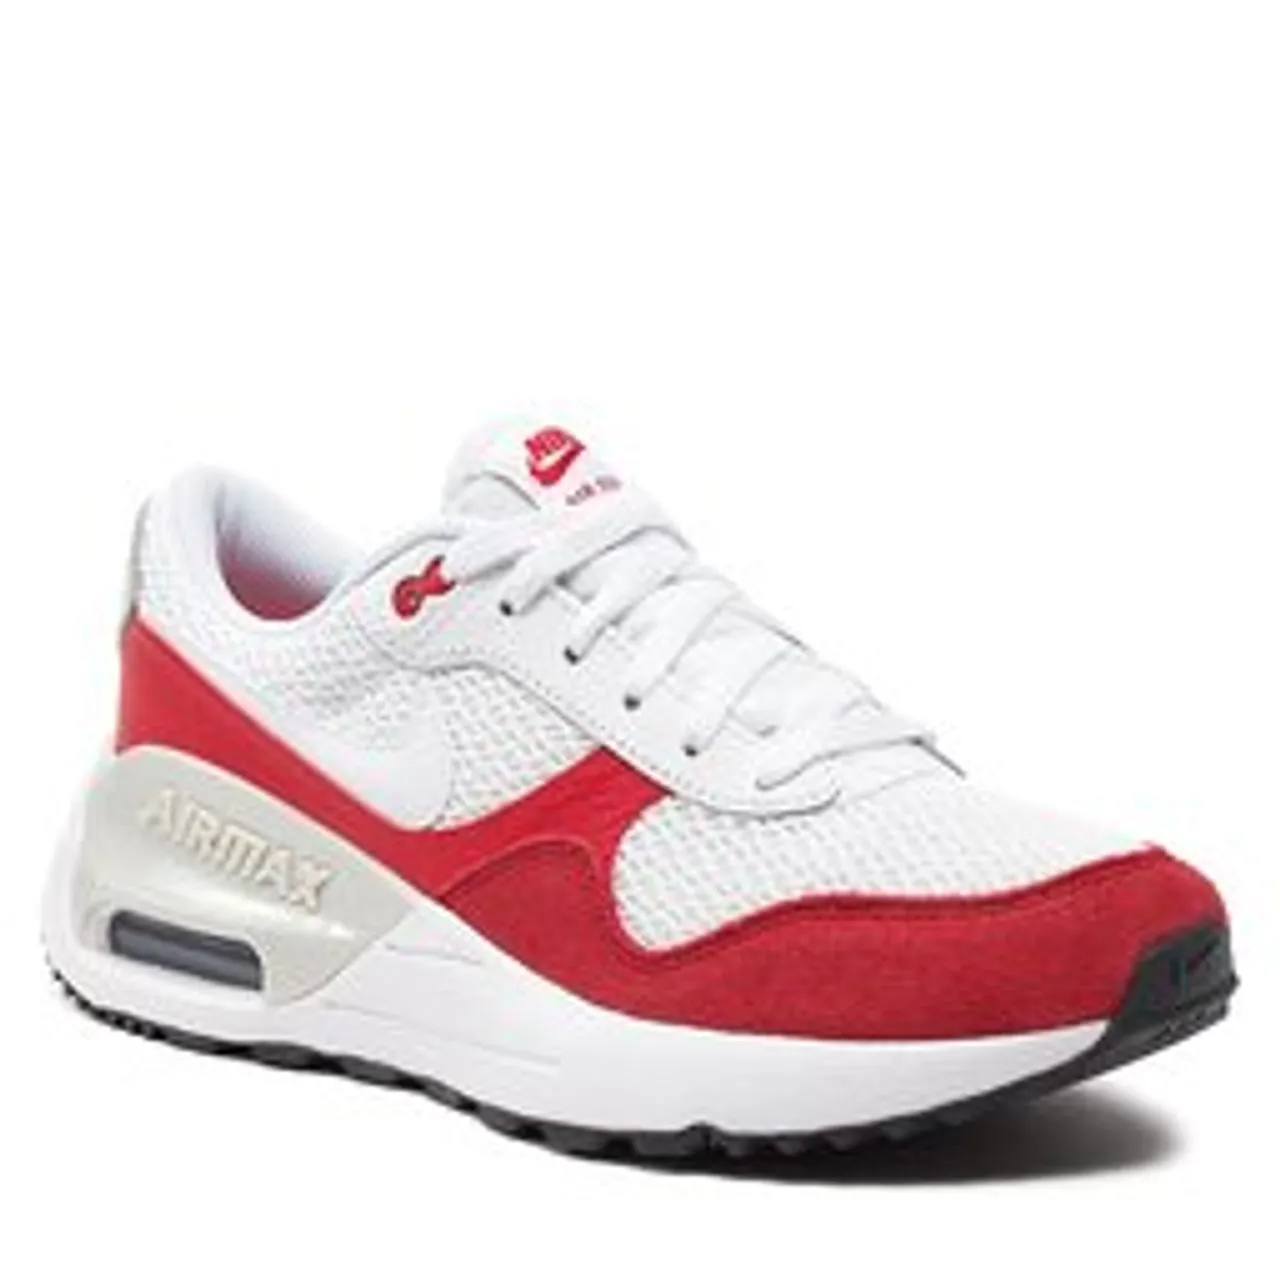 Schuhe Nike Air Max Systm (GS) DQ0284 108 White/University Red